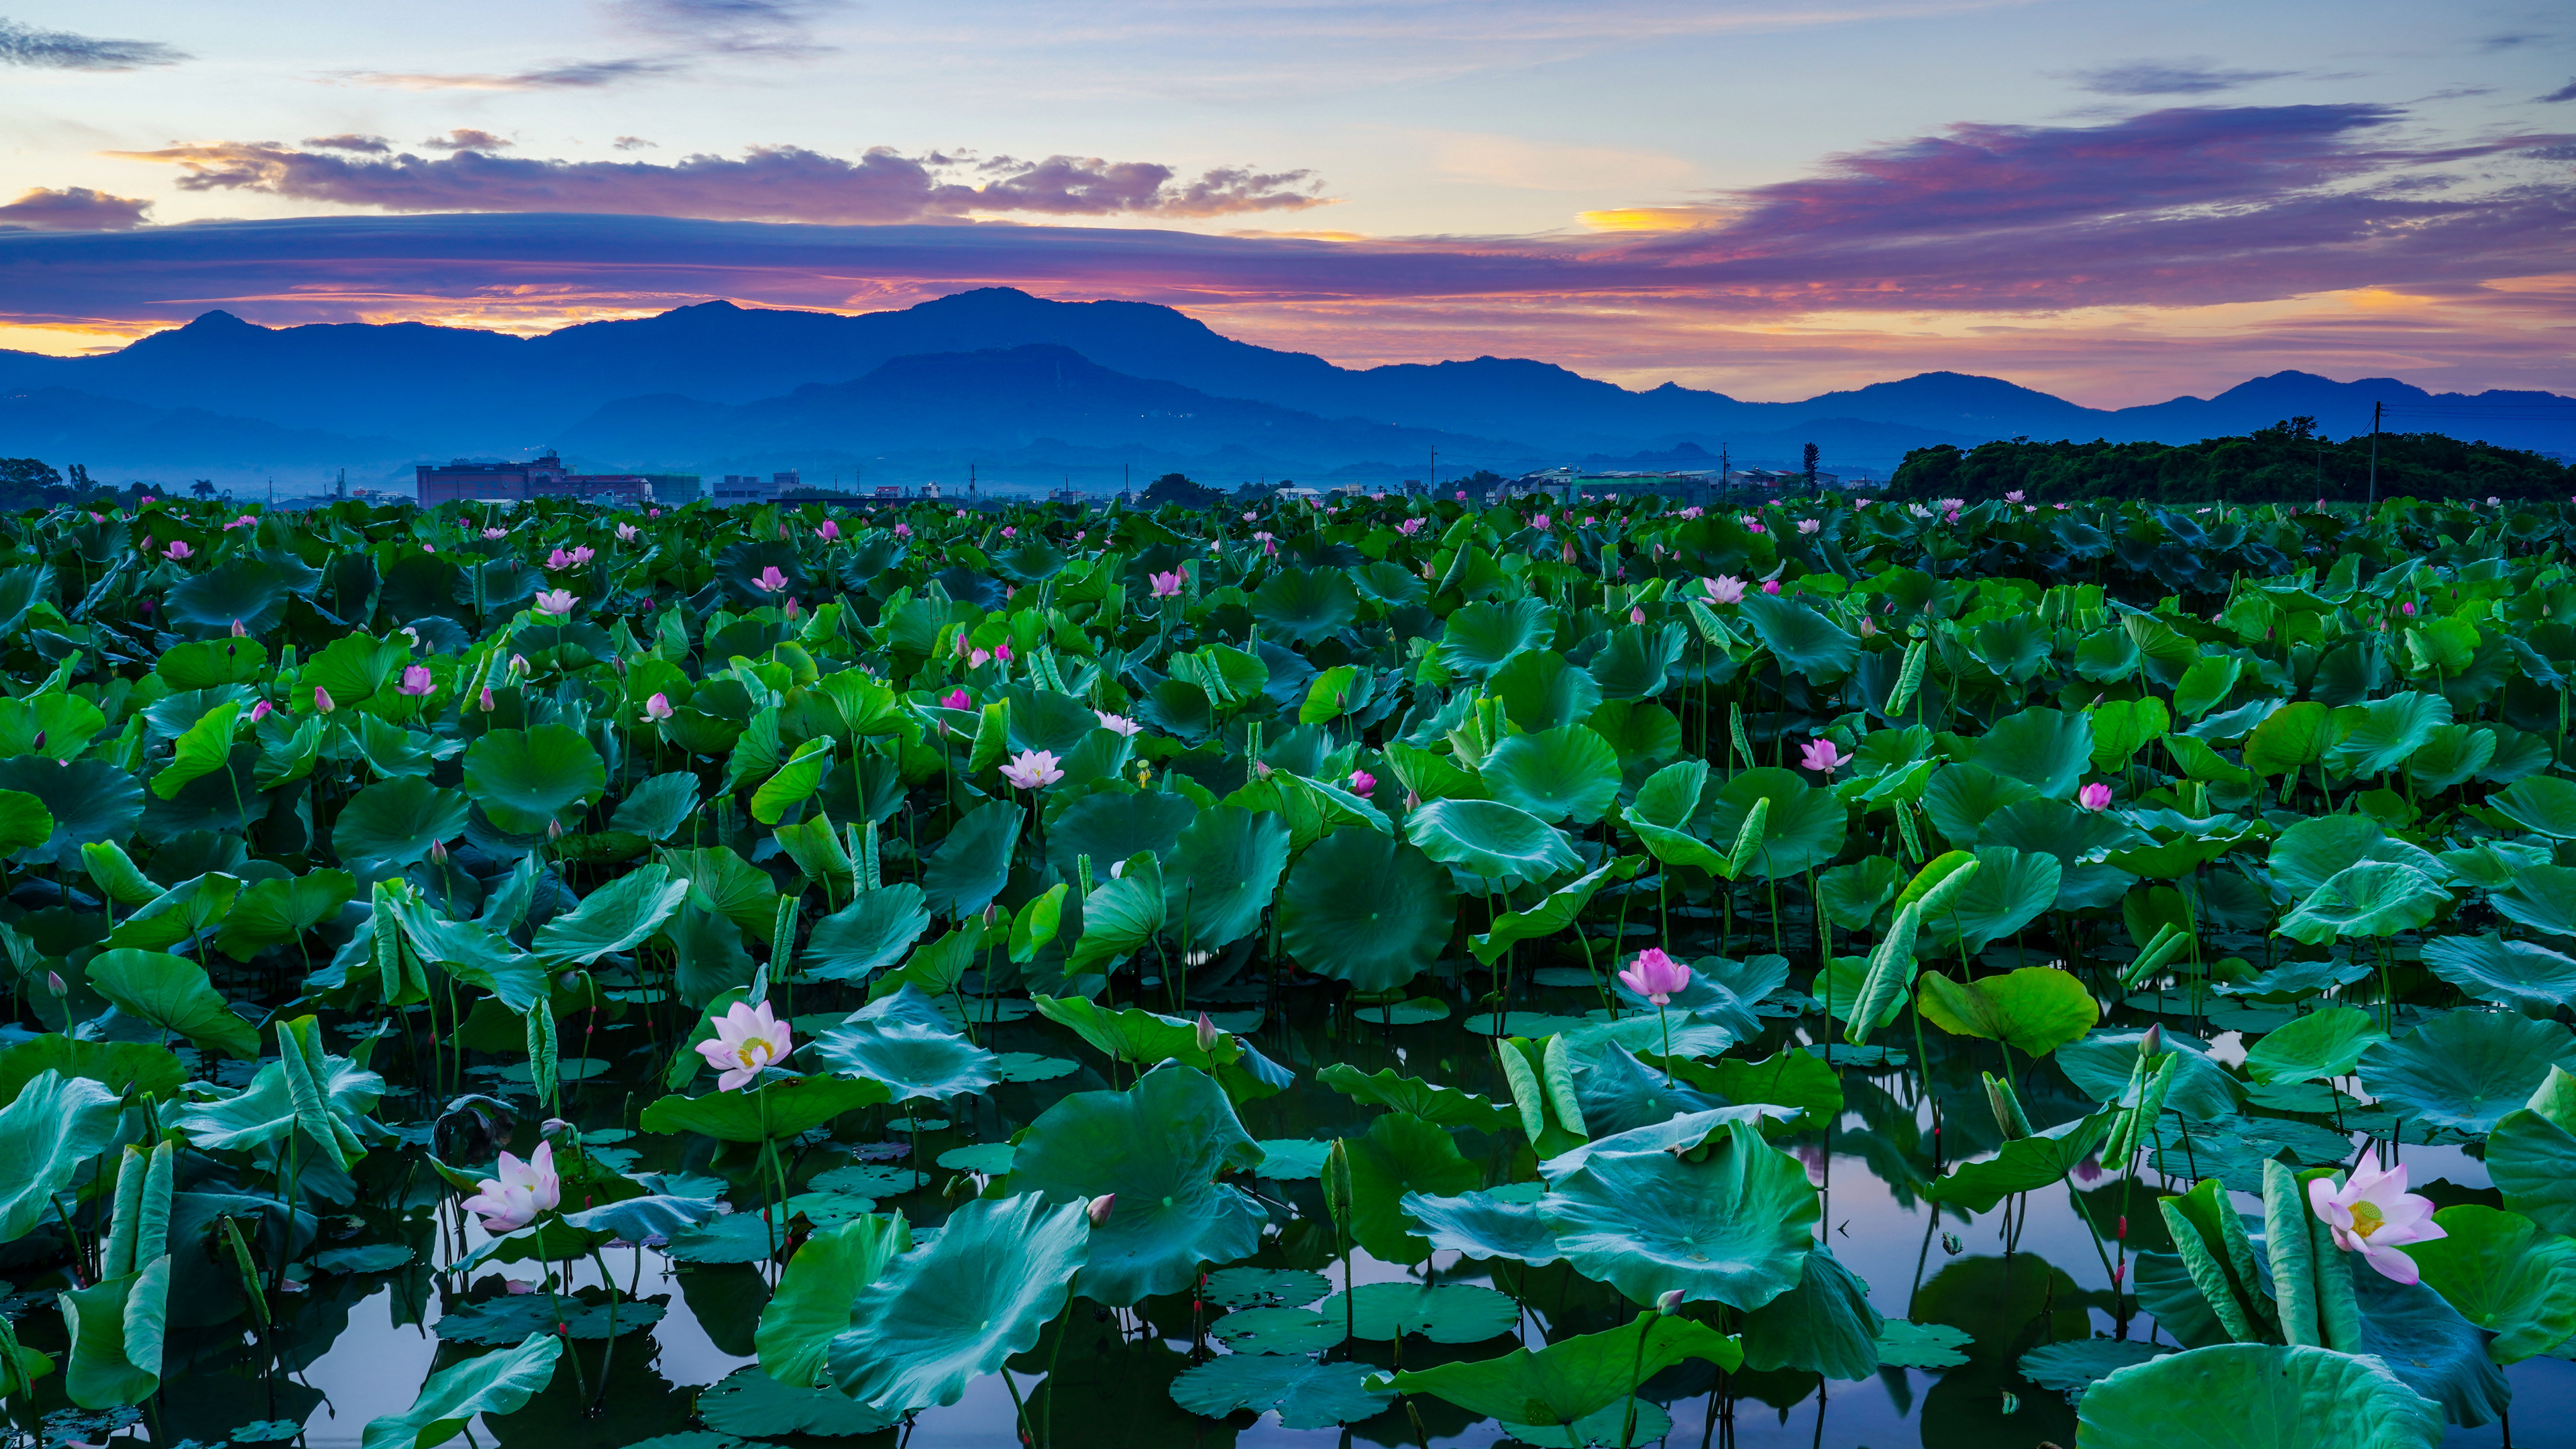 General 3840x2160 water lilies sunset landscape nature flowers mountains sunset glow clouds water reflection